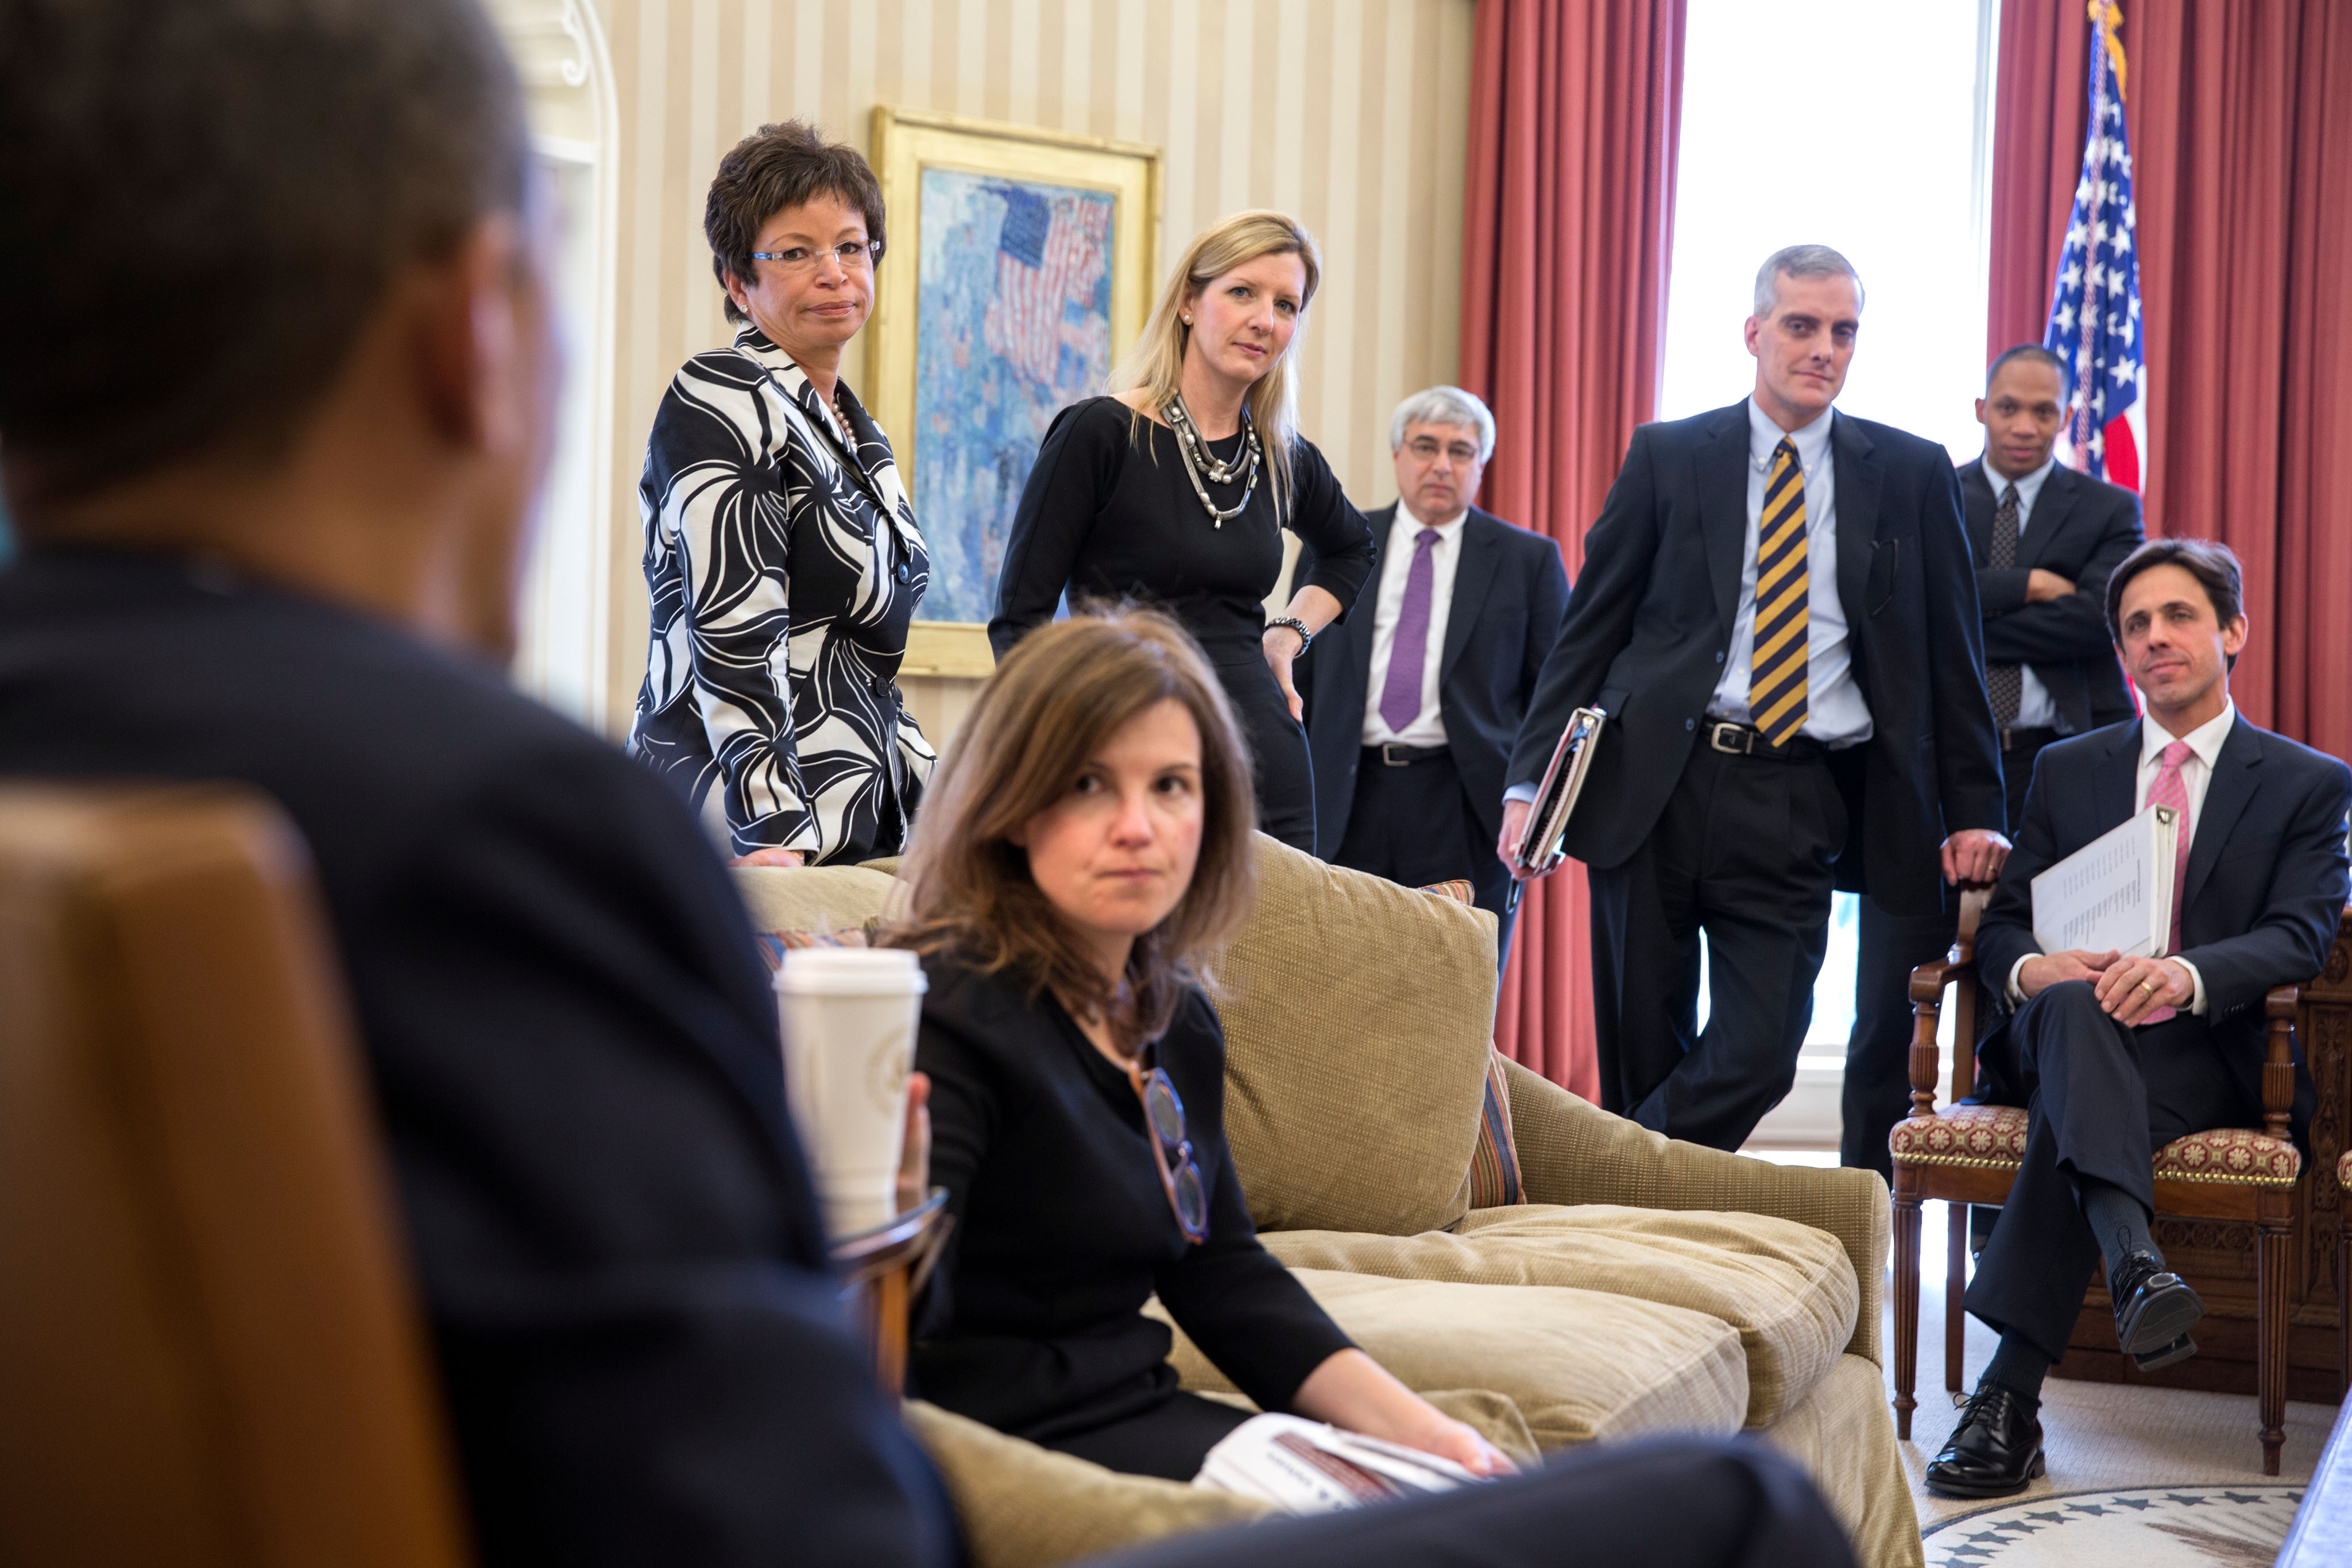 Barack Obama meets with senior advisors in the Oval Office on March 26, 2013. Pictured, from left, Senior Advisor Valerie Jarrett; Alyssa Mastromonaco, Deputy Chief of Staff for Operations; Kathryn Ruemmler, Counsel to the President; Pete Rouse, Counselor to the President; Chief of Staff Denis McDonough; Rob Nabors, Deputy White House Chief of Staff for Policy; and David Simas, Deputy Senior Advisor for Communications and Strategy. (Pete Souza—dpa/AP)